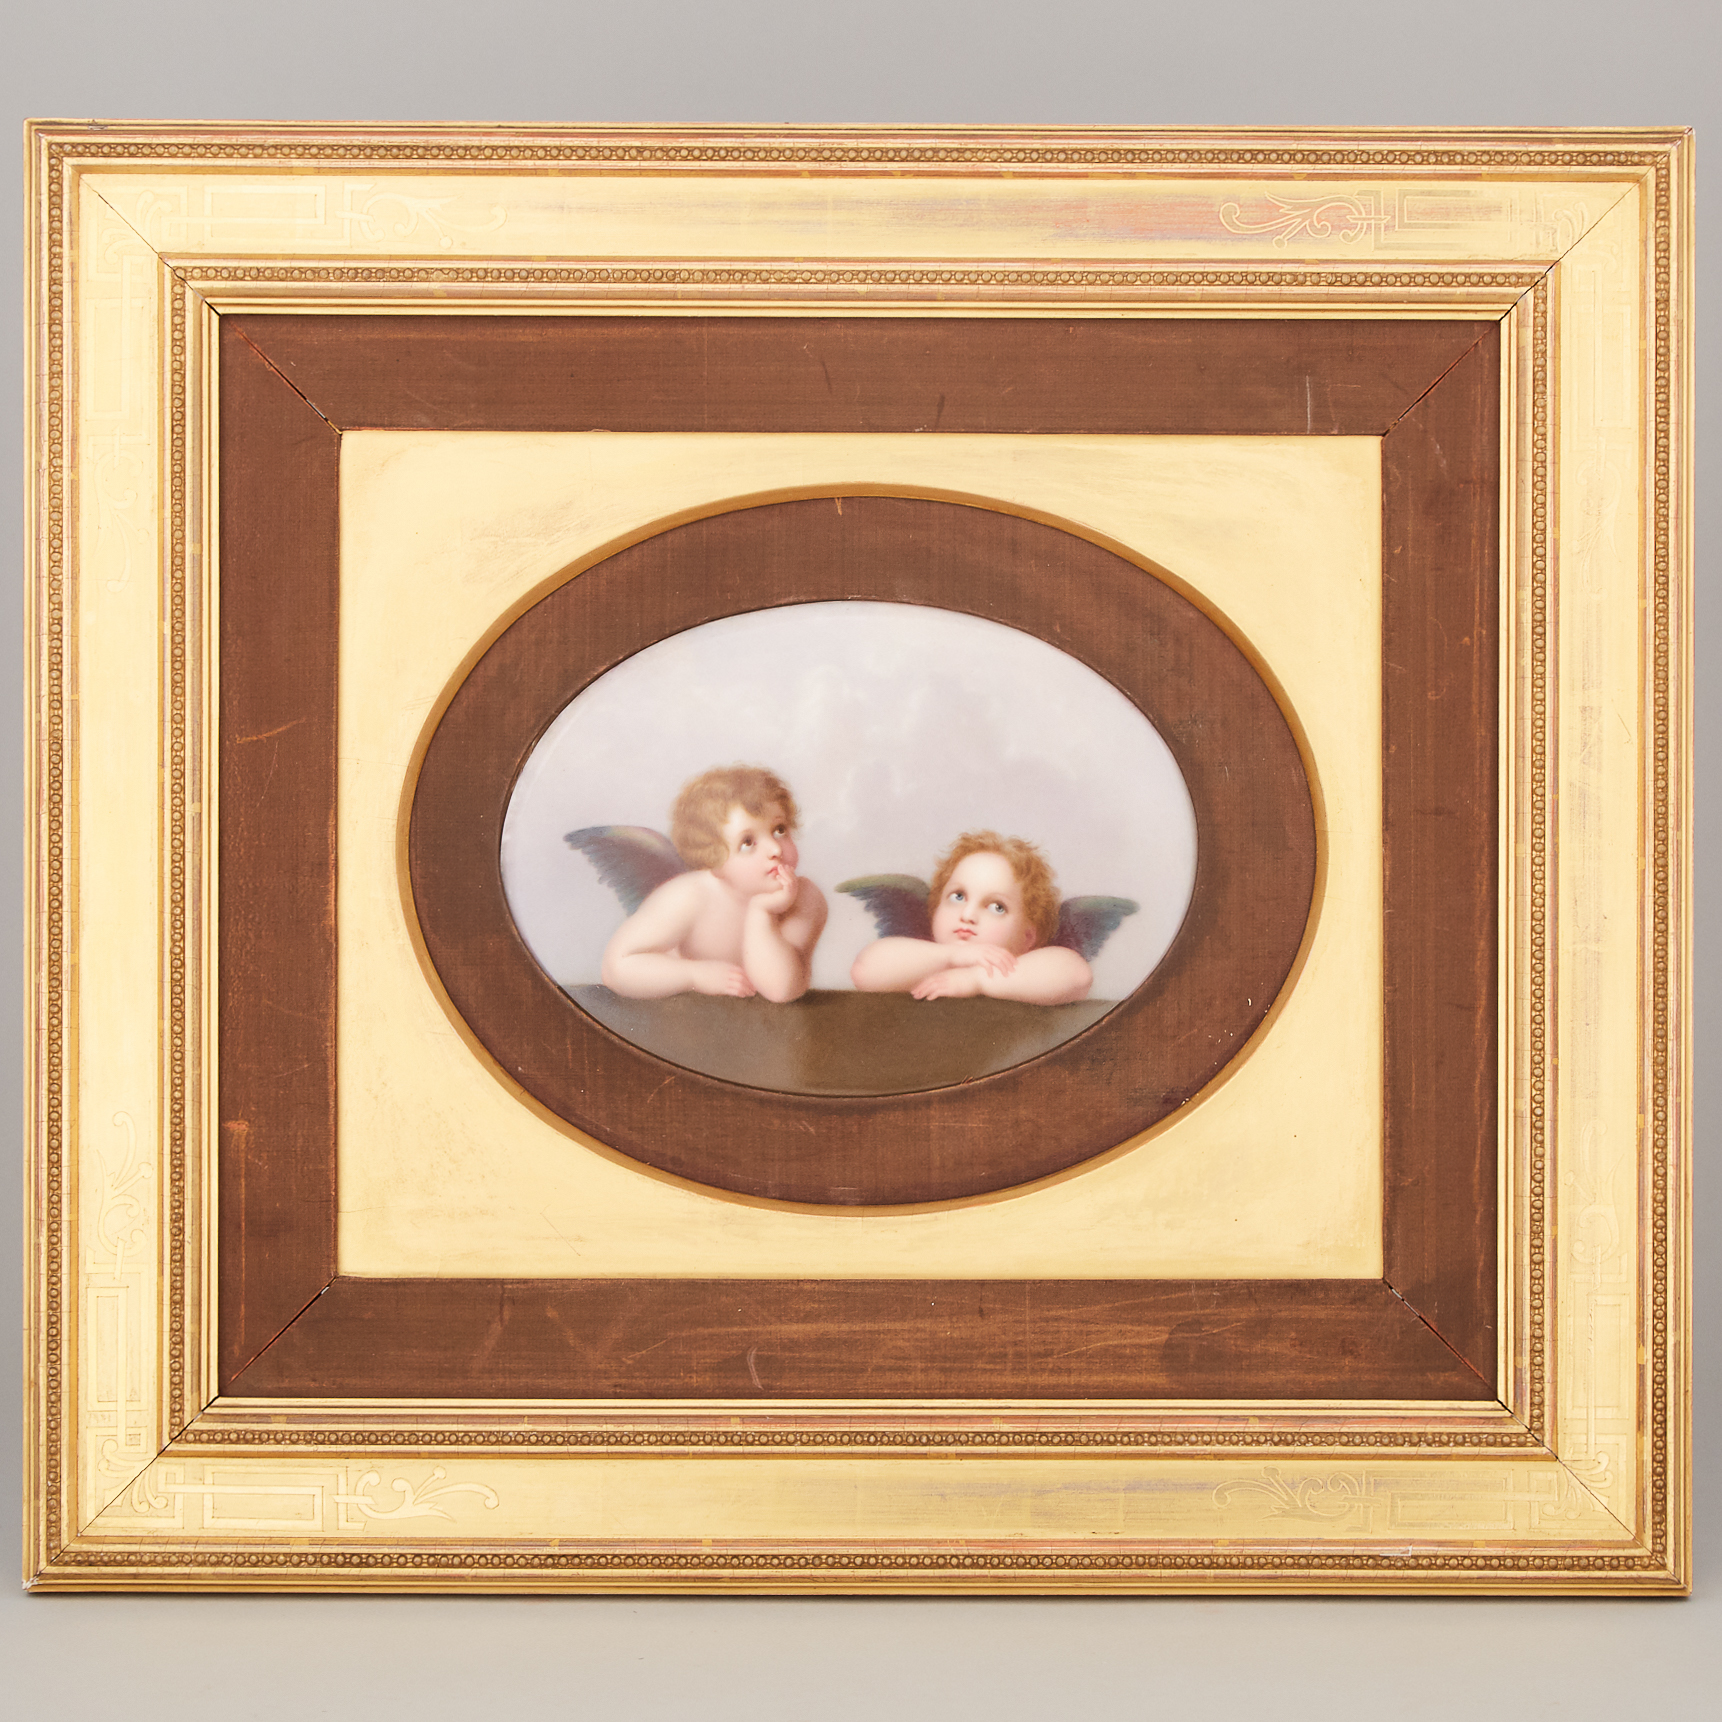 Berlin Oval Plaque of Two Cherubs, late 19th century